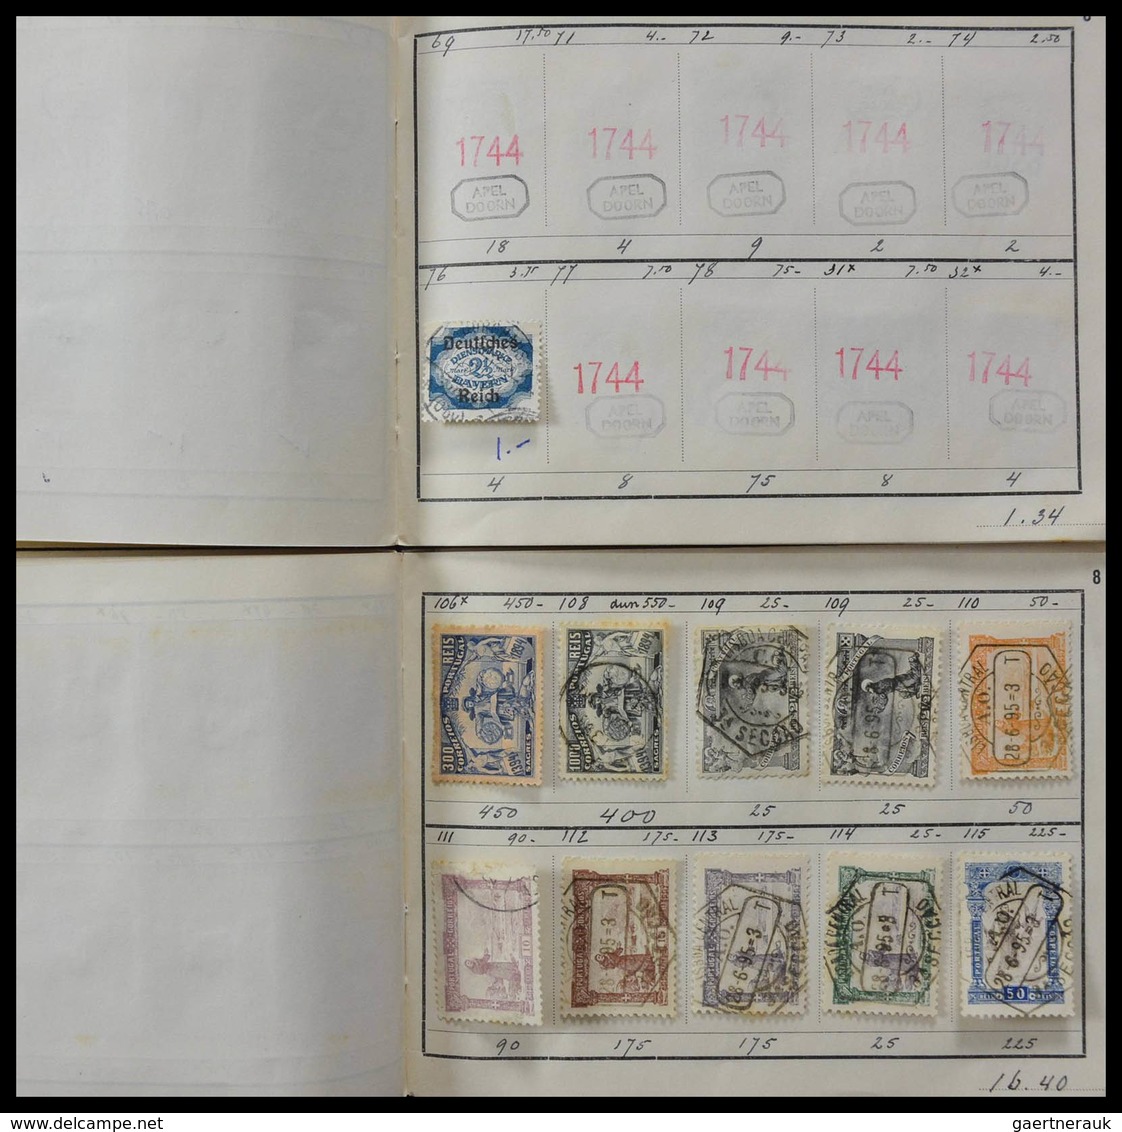 Alle Welt: Incredible lot of ancient approval booklets from 1947, all very wellfilled, offered intac